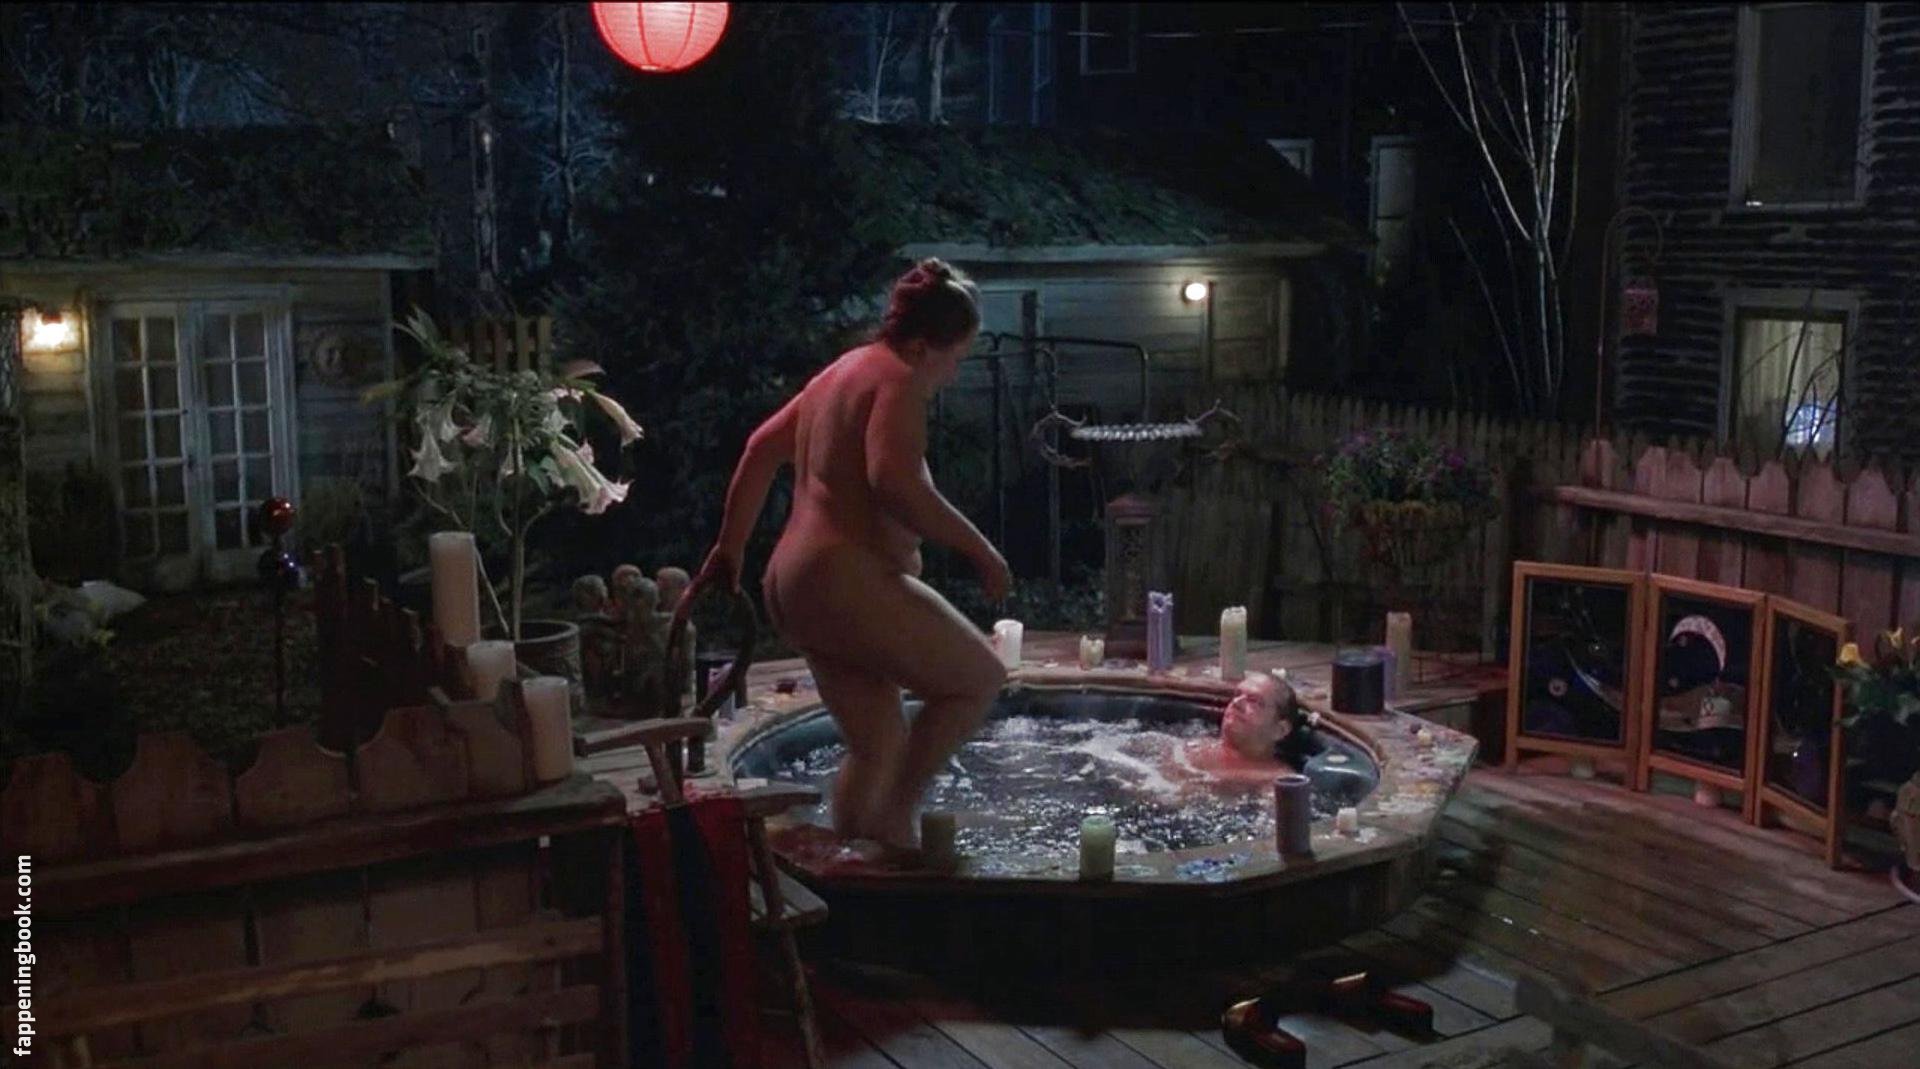 Kathy Bates Nude, The Fappening - Photo #290704 - FappeningBook.